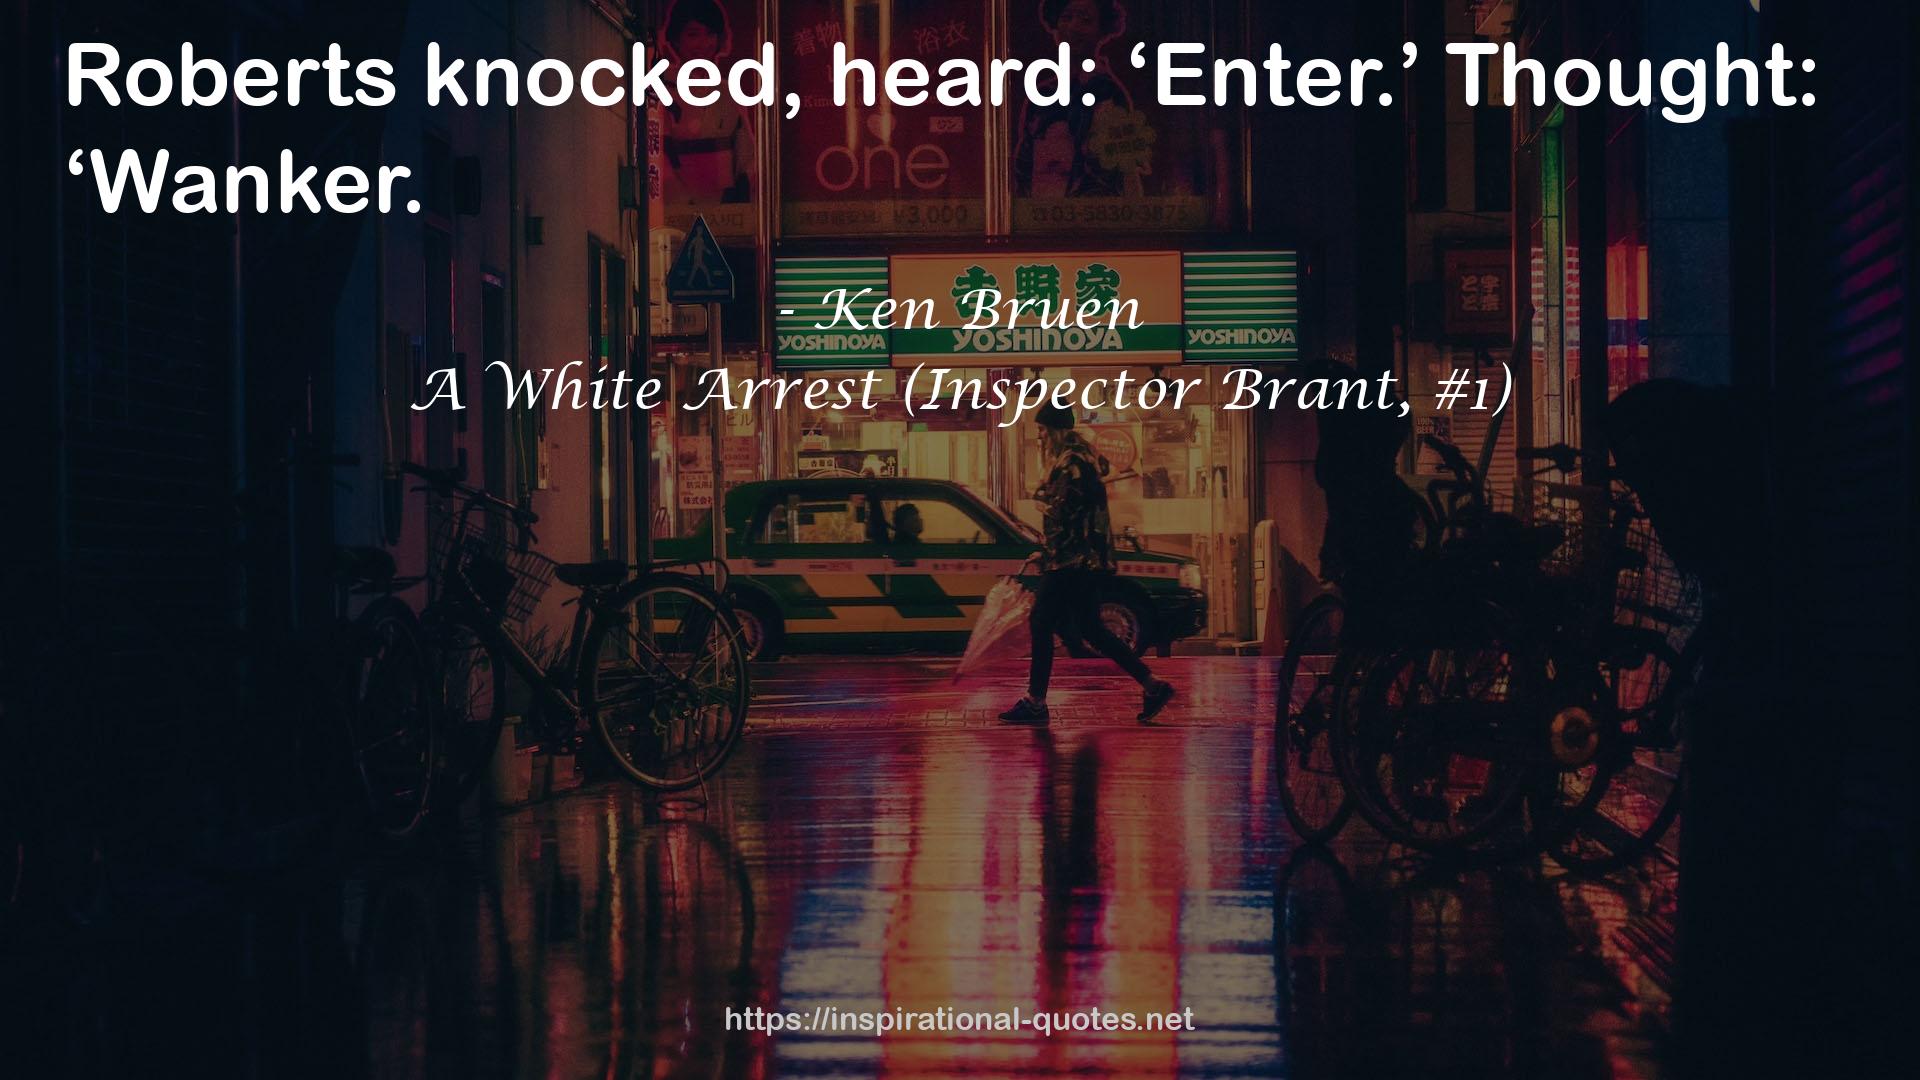 A White Arrest (Inspector Brant, #1) QUOTES